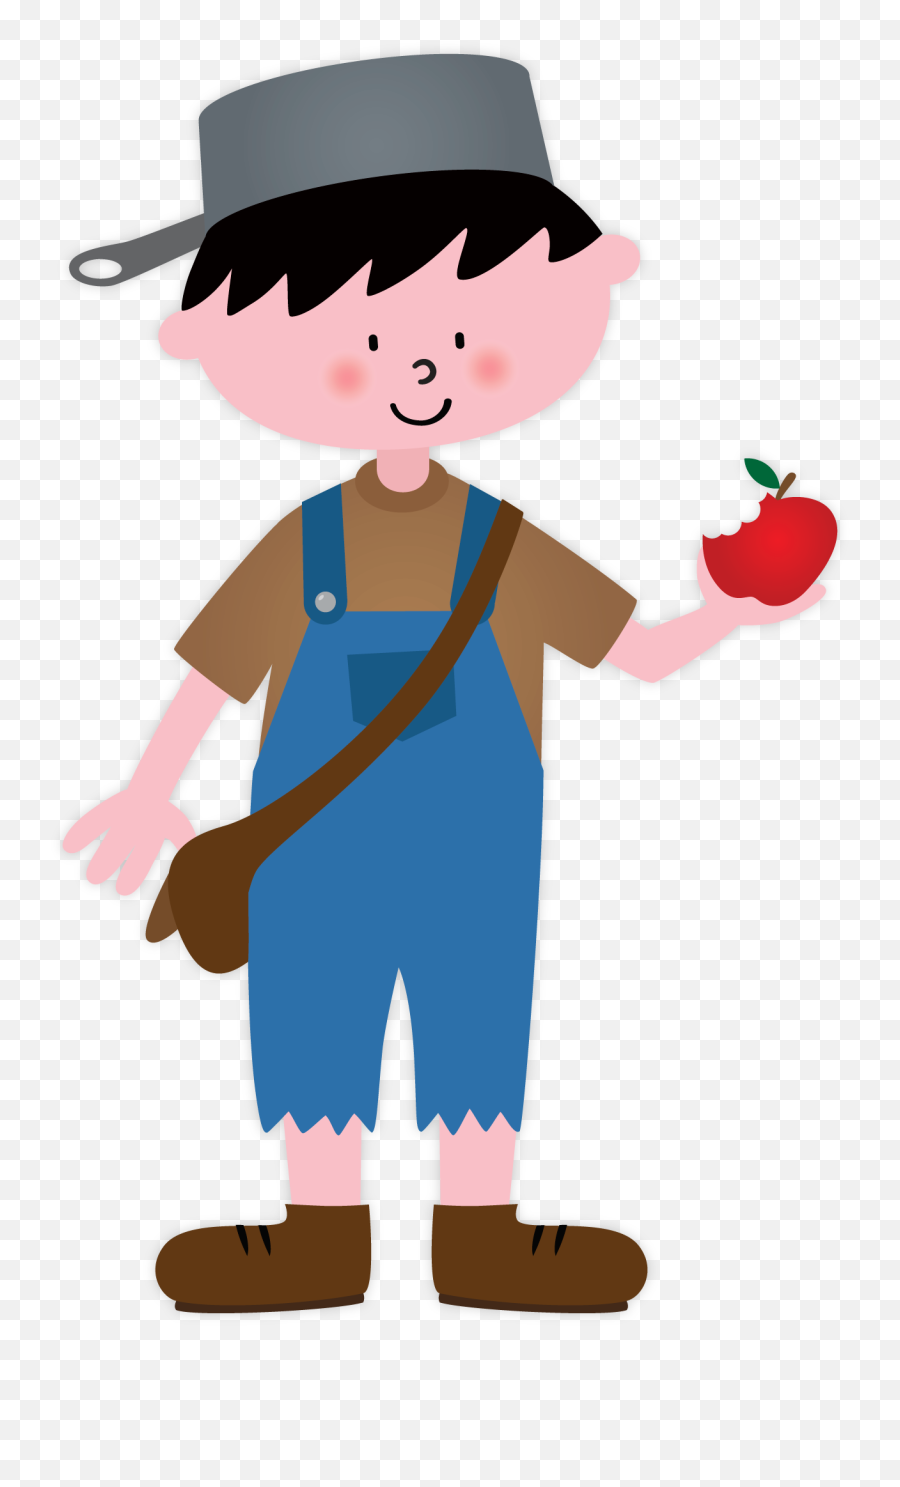 Johnny Appleseed - Johnny Appleseed Clipart Emoji,Johnny Appleseed Clipart